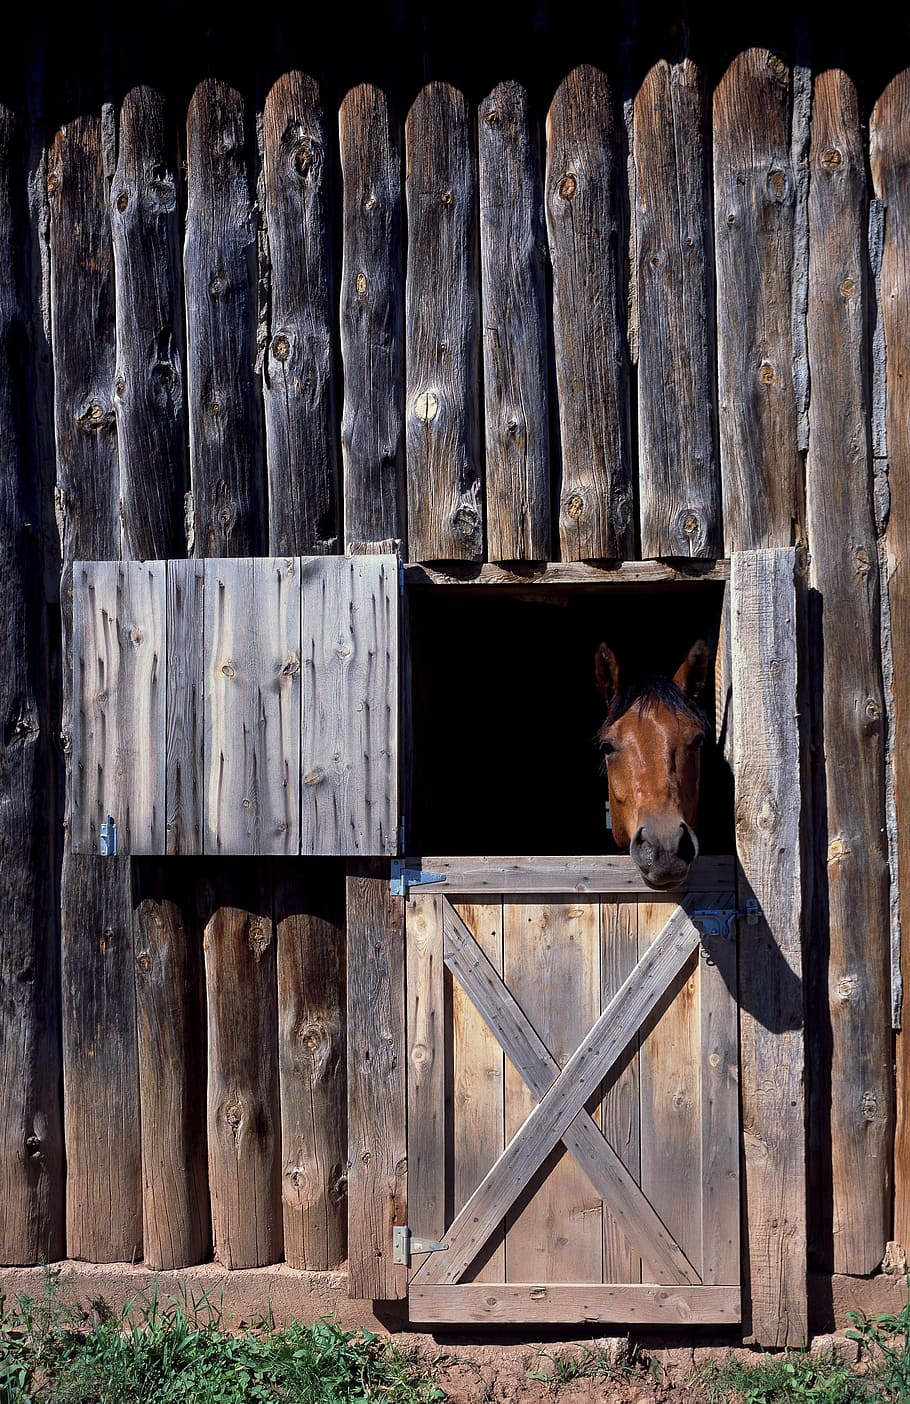 brown horse inside cage, horse stable, animal, nature, equestrian